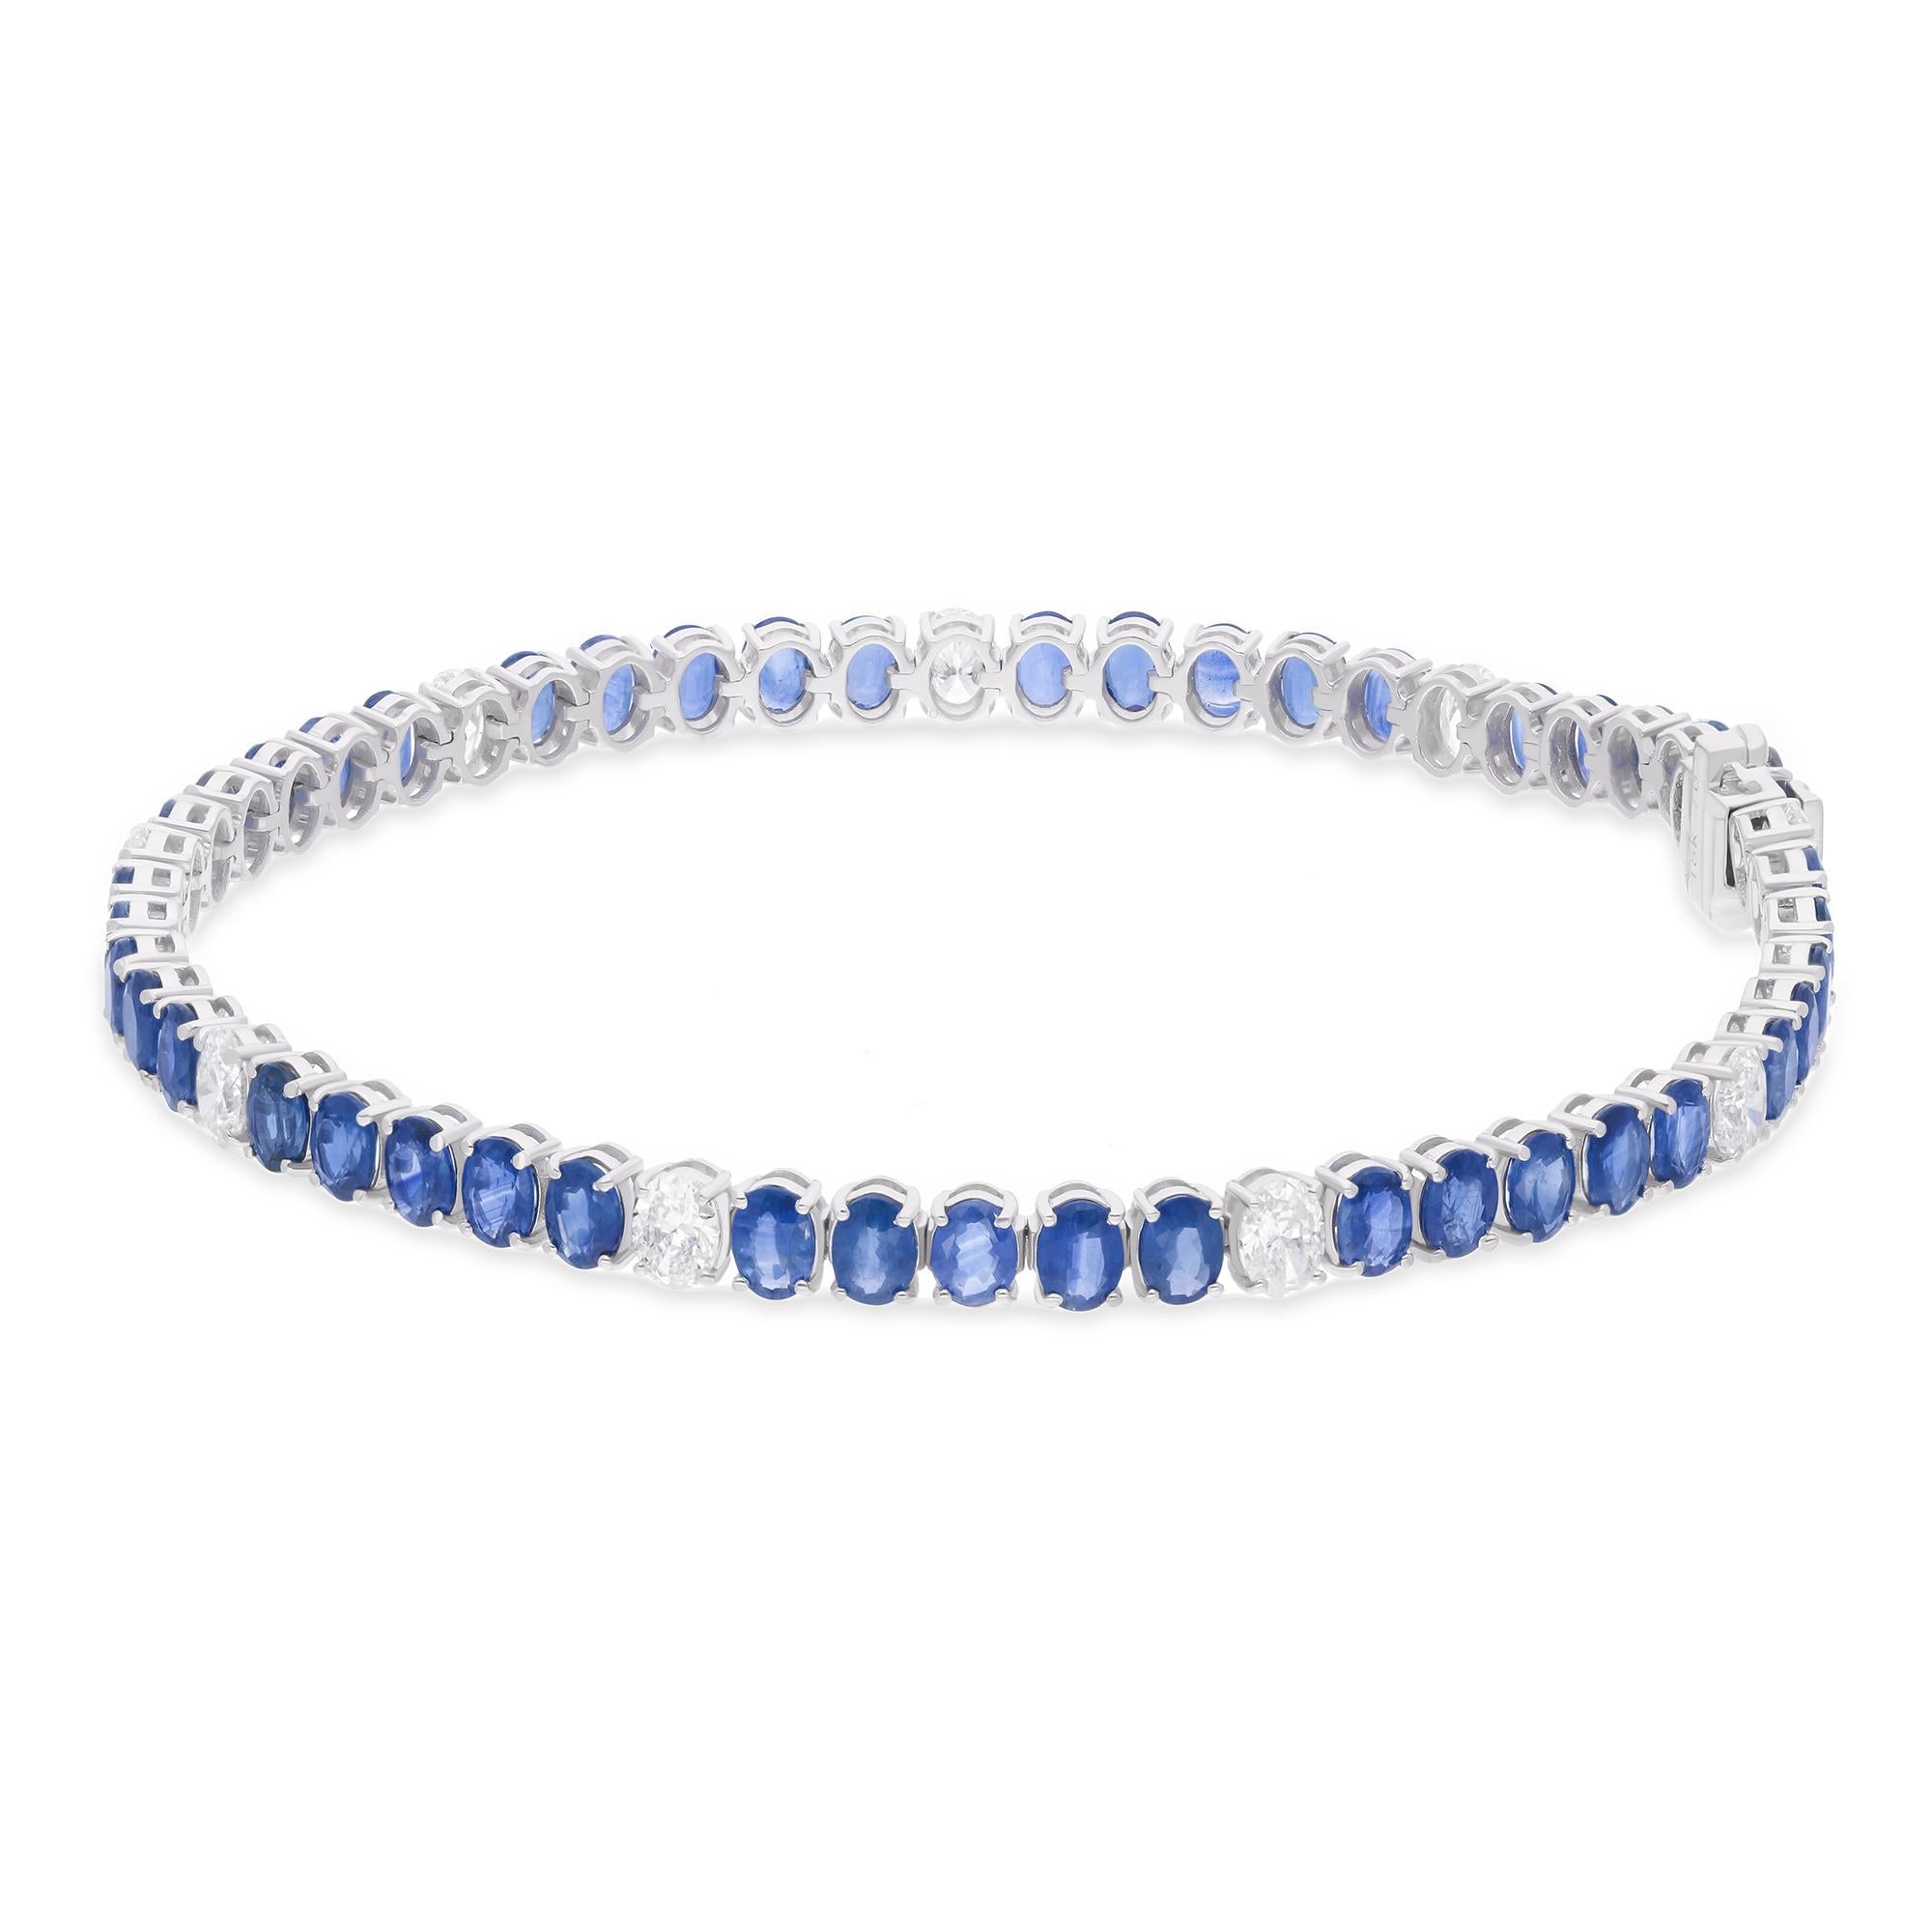 Complementing the allure of the sapphires are the sparkling diamonds that adorn the bracelet, adding a touch of brilliance and sophistication. Set in delicate clusters, these diamonds accentuate the natural beauty of the sapphires, creating a